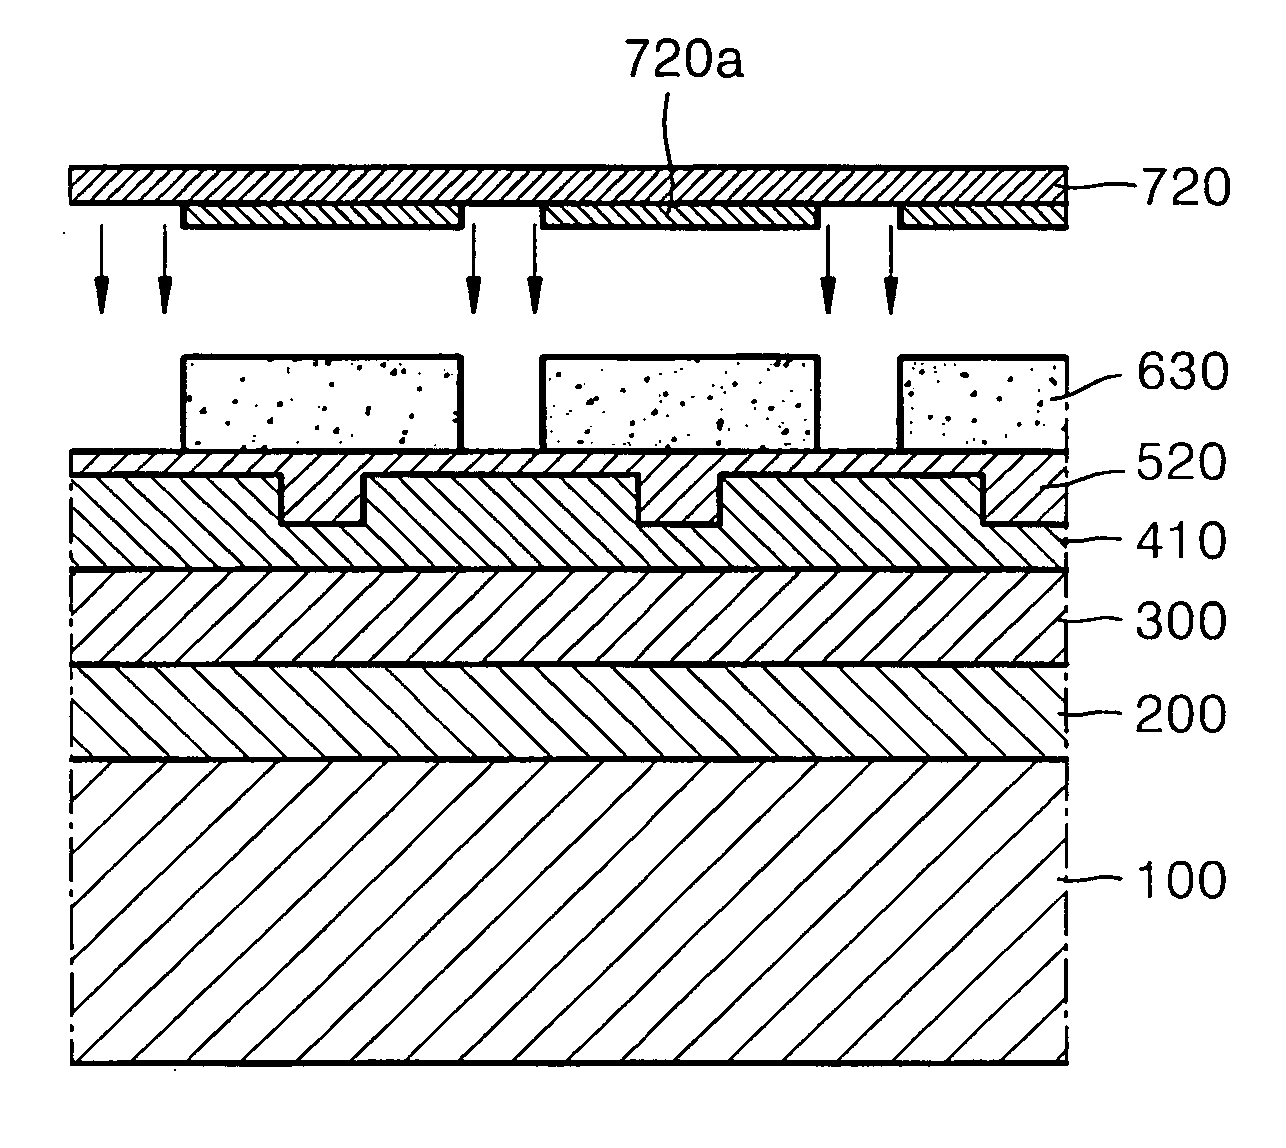 Method of forming micro-patterns using multiple photolithography process